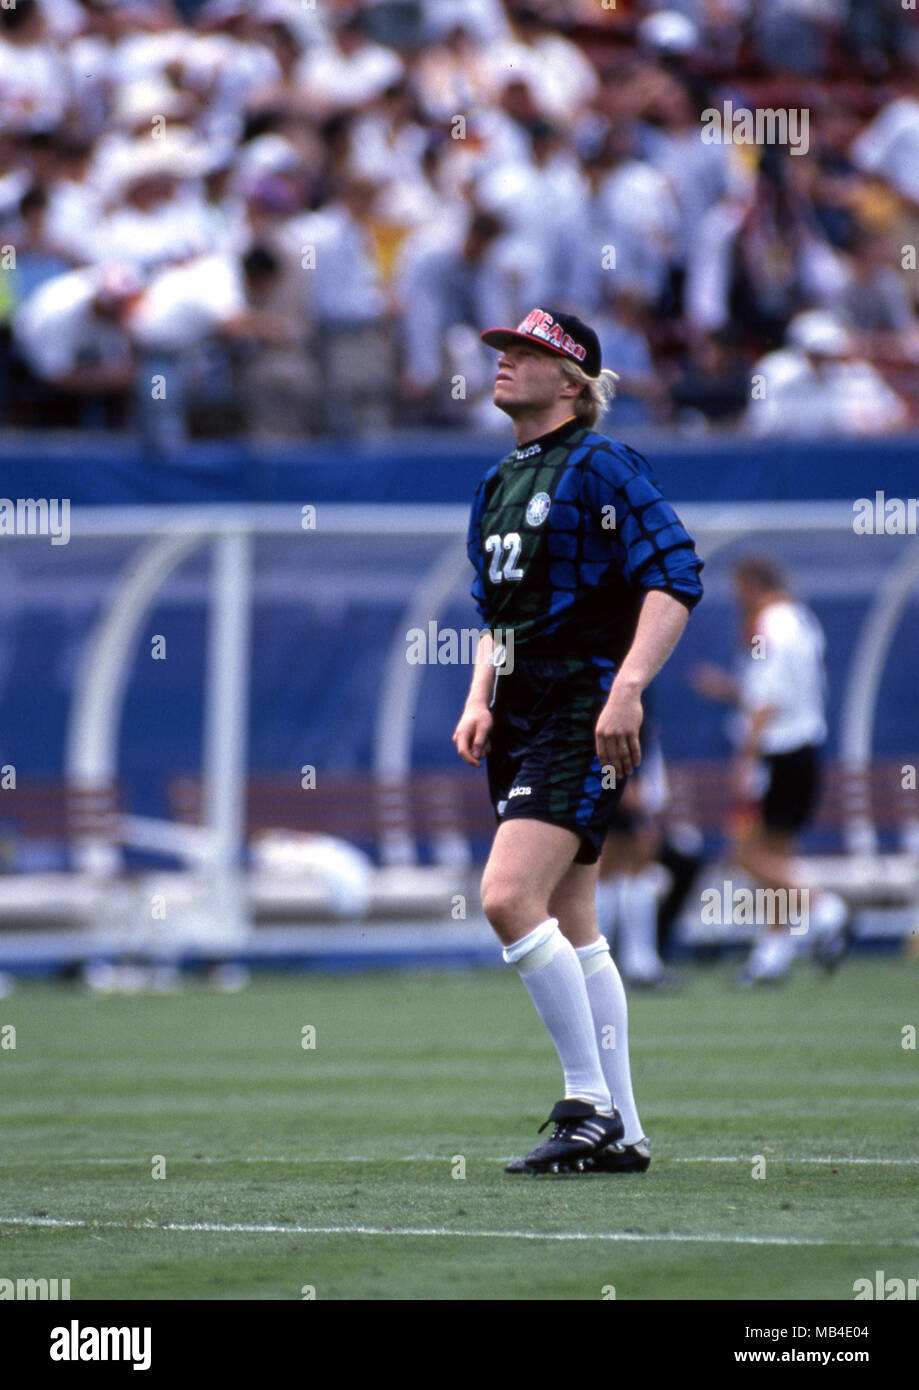 Oliver Kahn editorial stock photo. Image of player, munich - 12884338